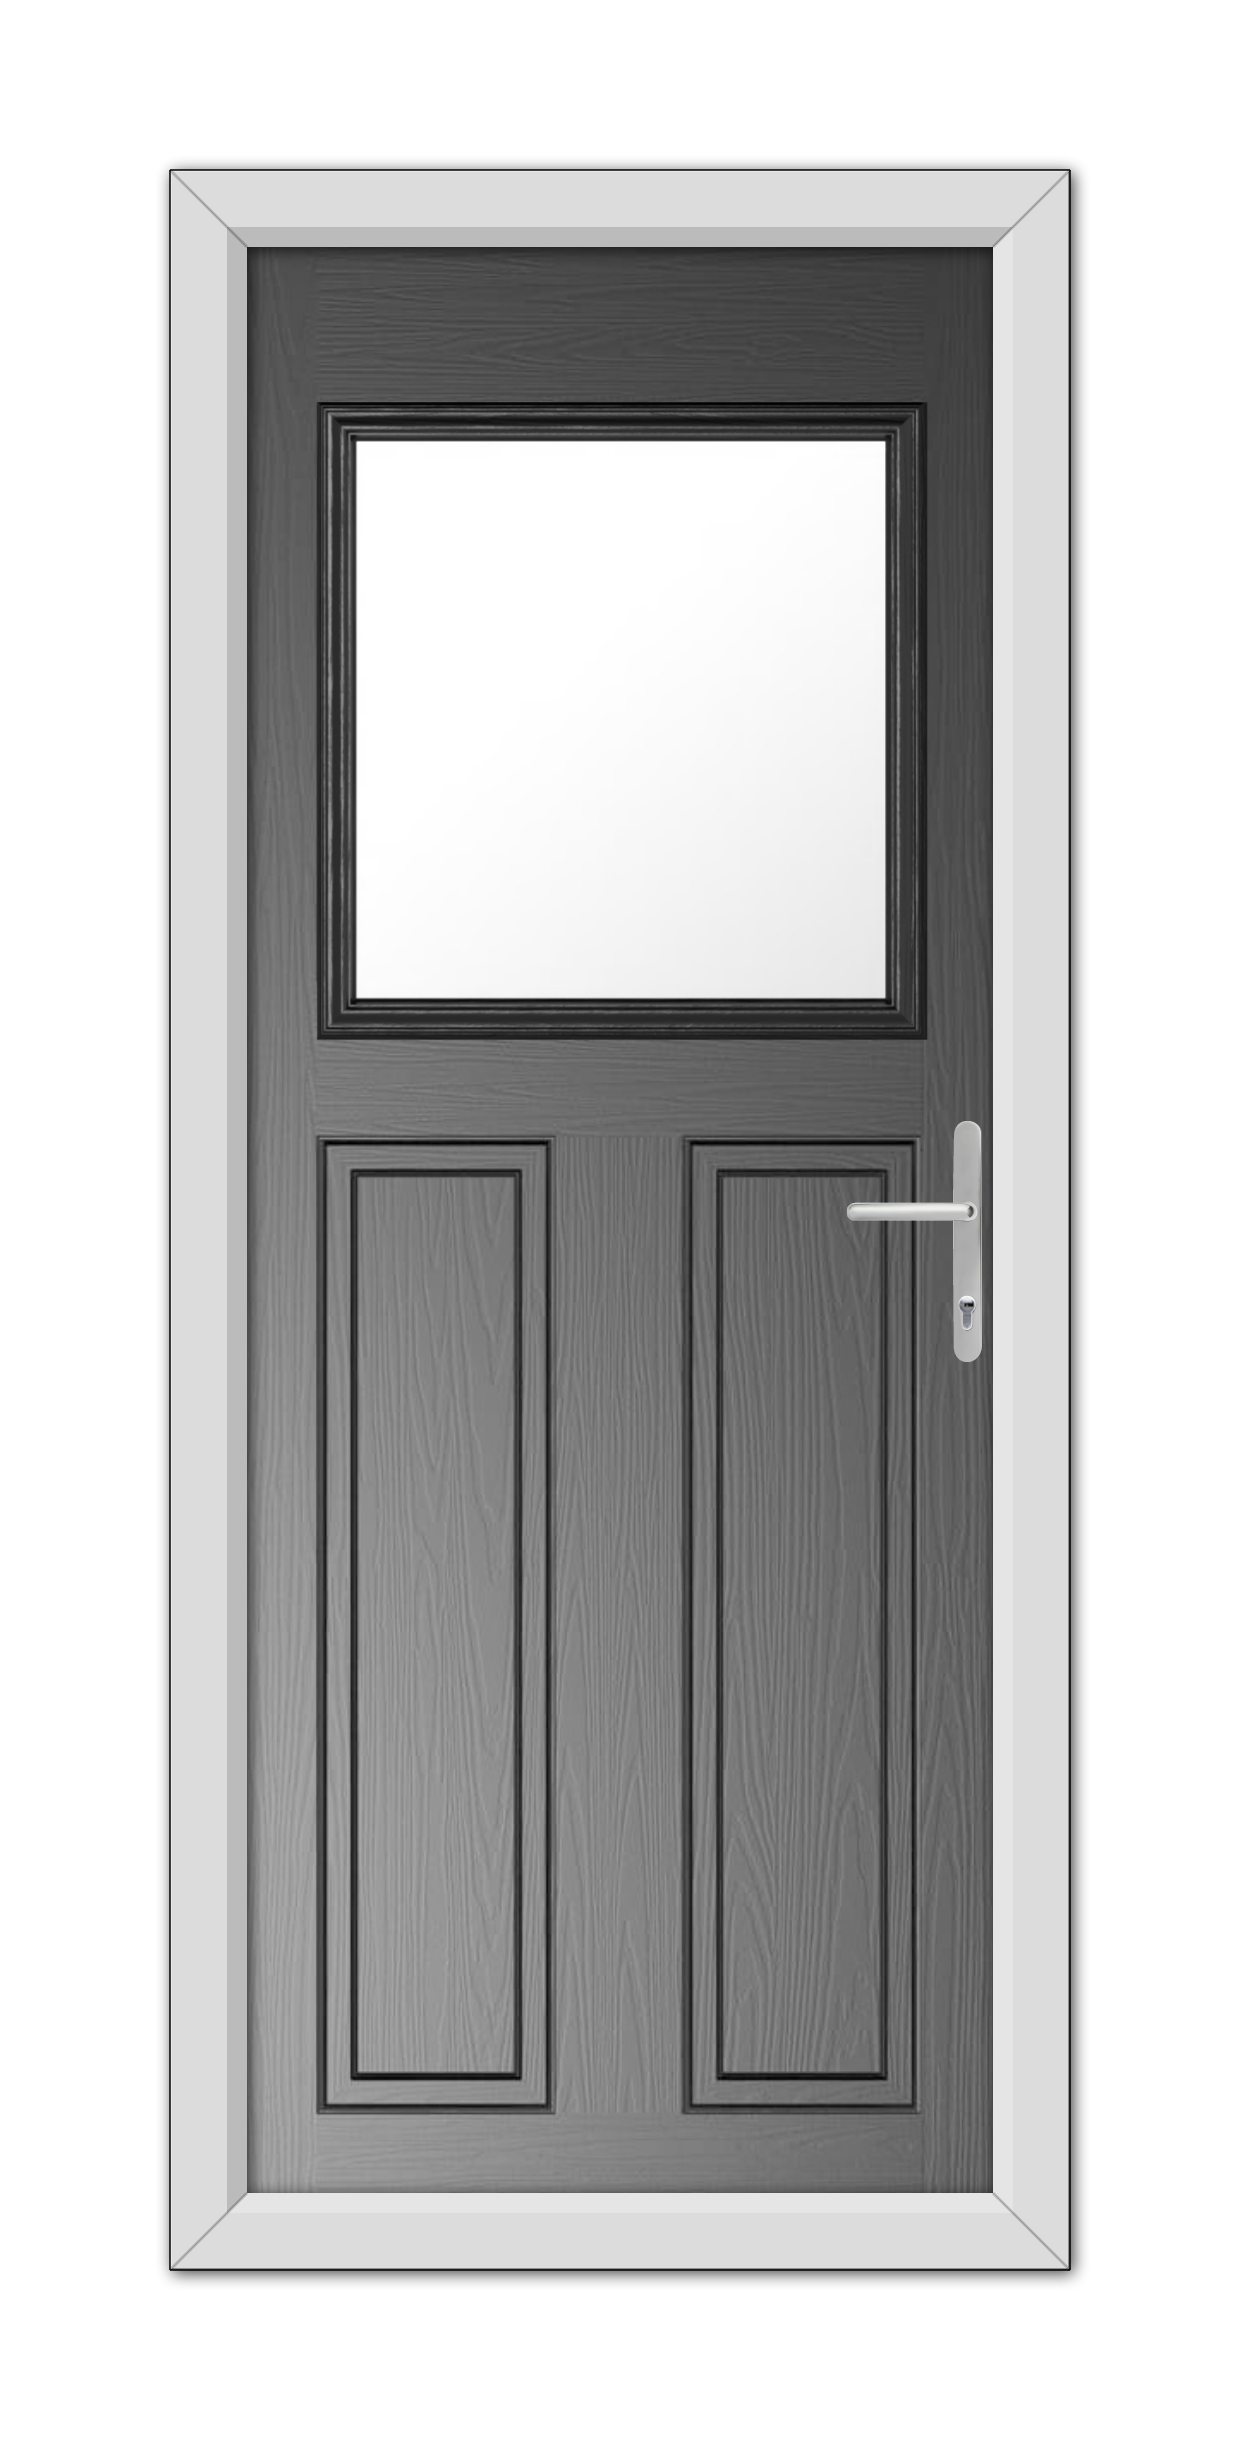 A Black Axwell Composite Door 48mm Timber Core with a rectangular window at the top and a metal handle on the right side, set within a white frame.